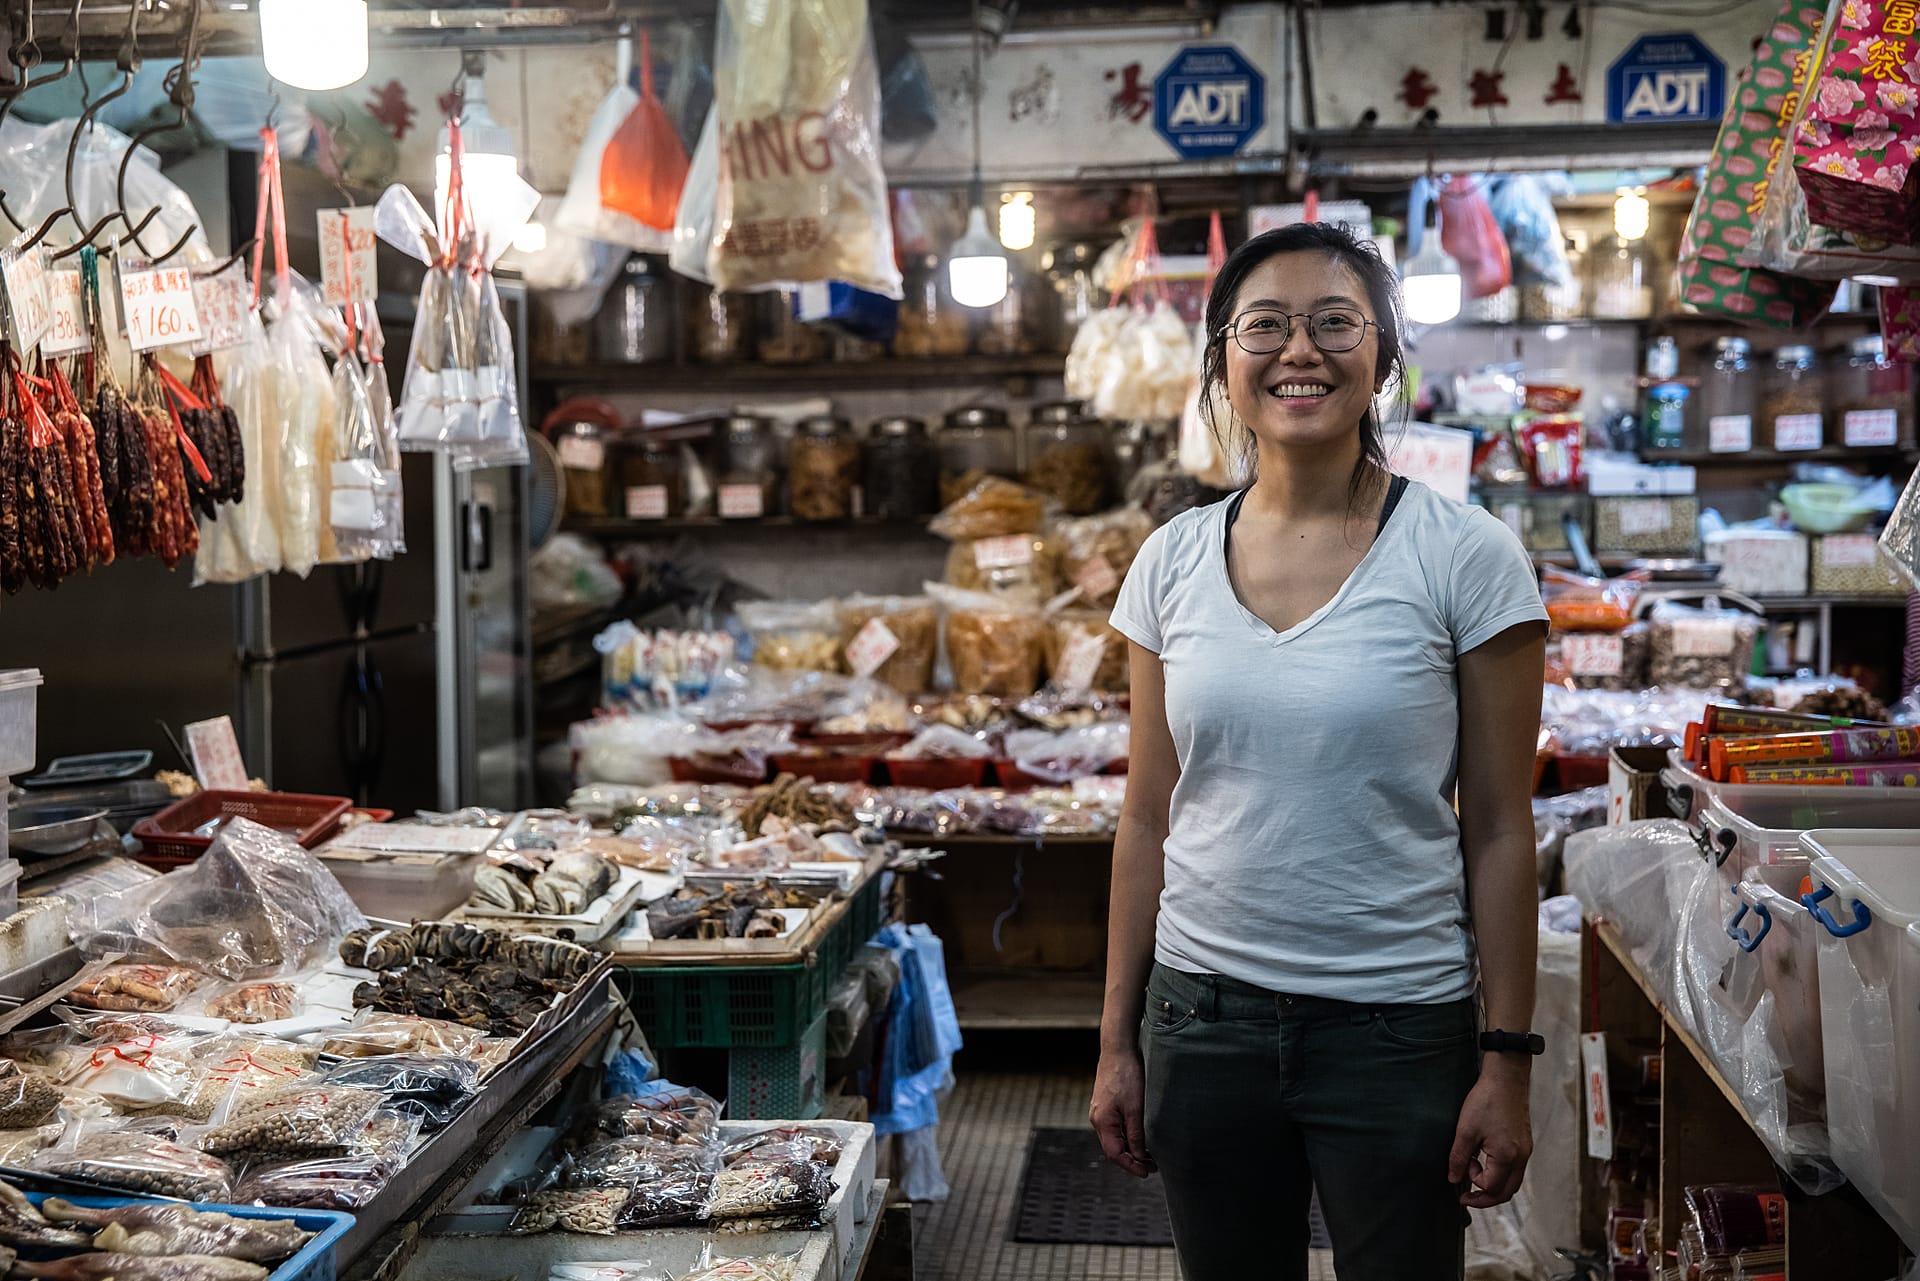 Jah Ying Chung, a food researcher and animal advocate in China, stands in a packaged food aisle of a store that is also a wet market. Jah Ying is the co-founder of The Good Growth Co., which researches Chinese consumers' attitudes toward food and works in the plant-based/alternative protein and animal welfare spaces. Hong Kong, China, 2022. #unboundproject / We Animals Media